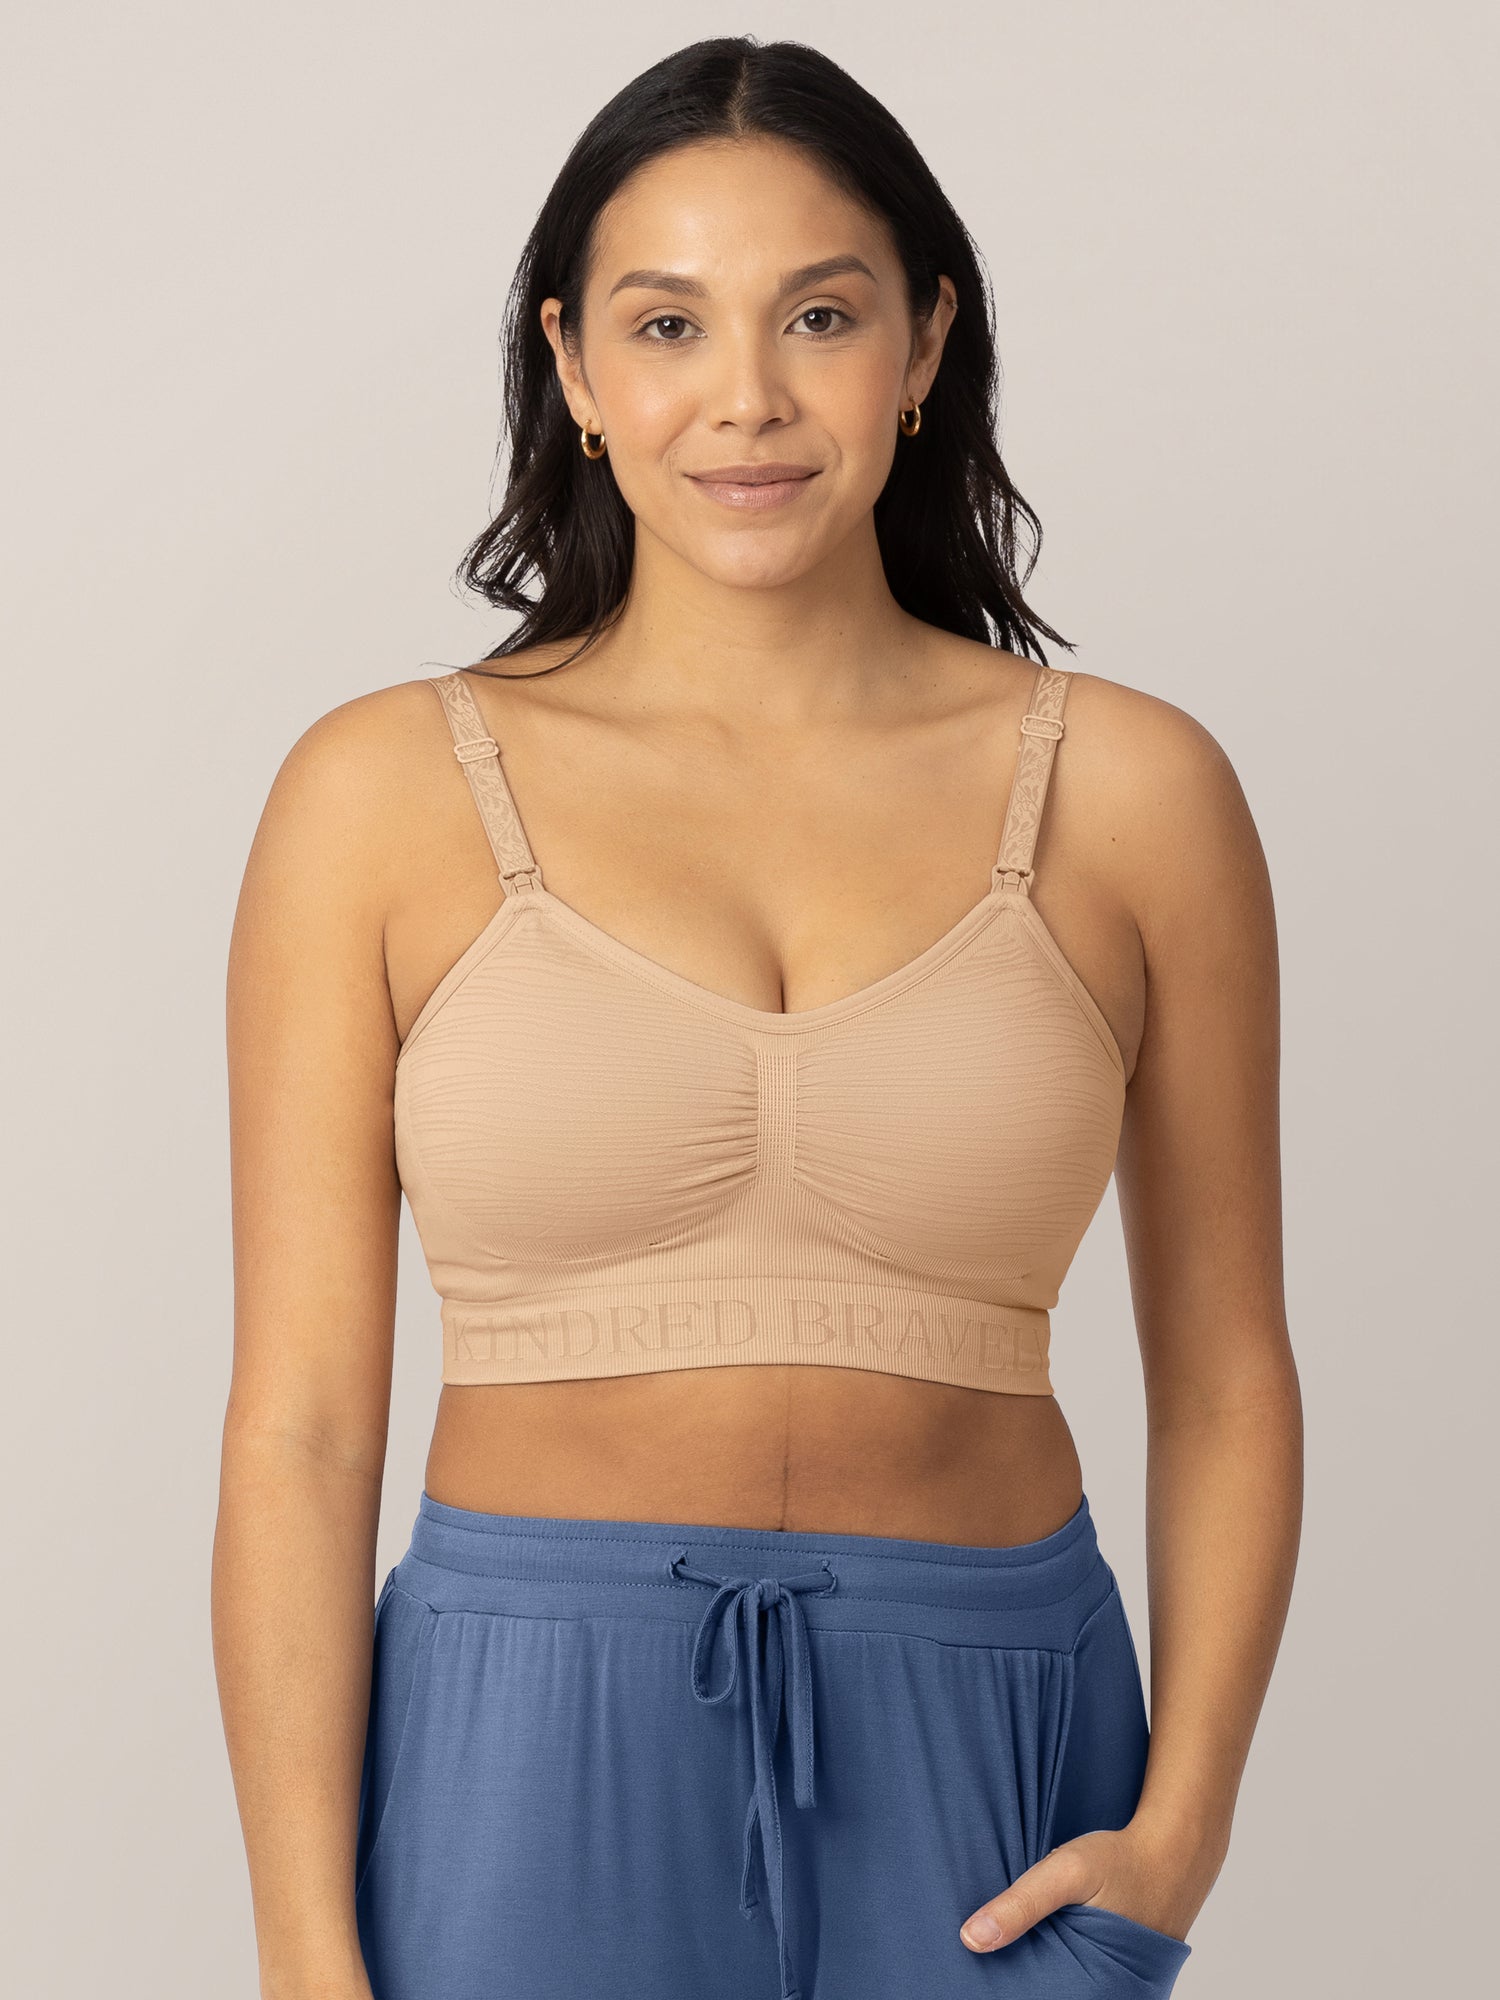 Sublime Hands-Free Pumping & Nursing Bra now available in BUSTY sizes!